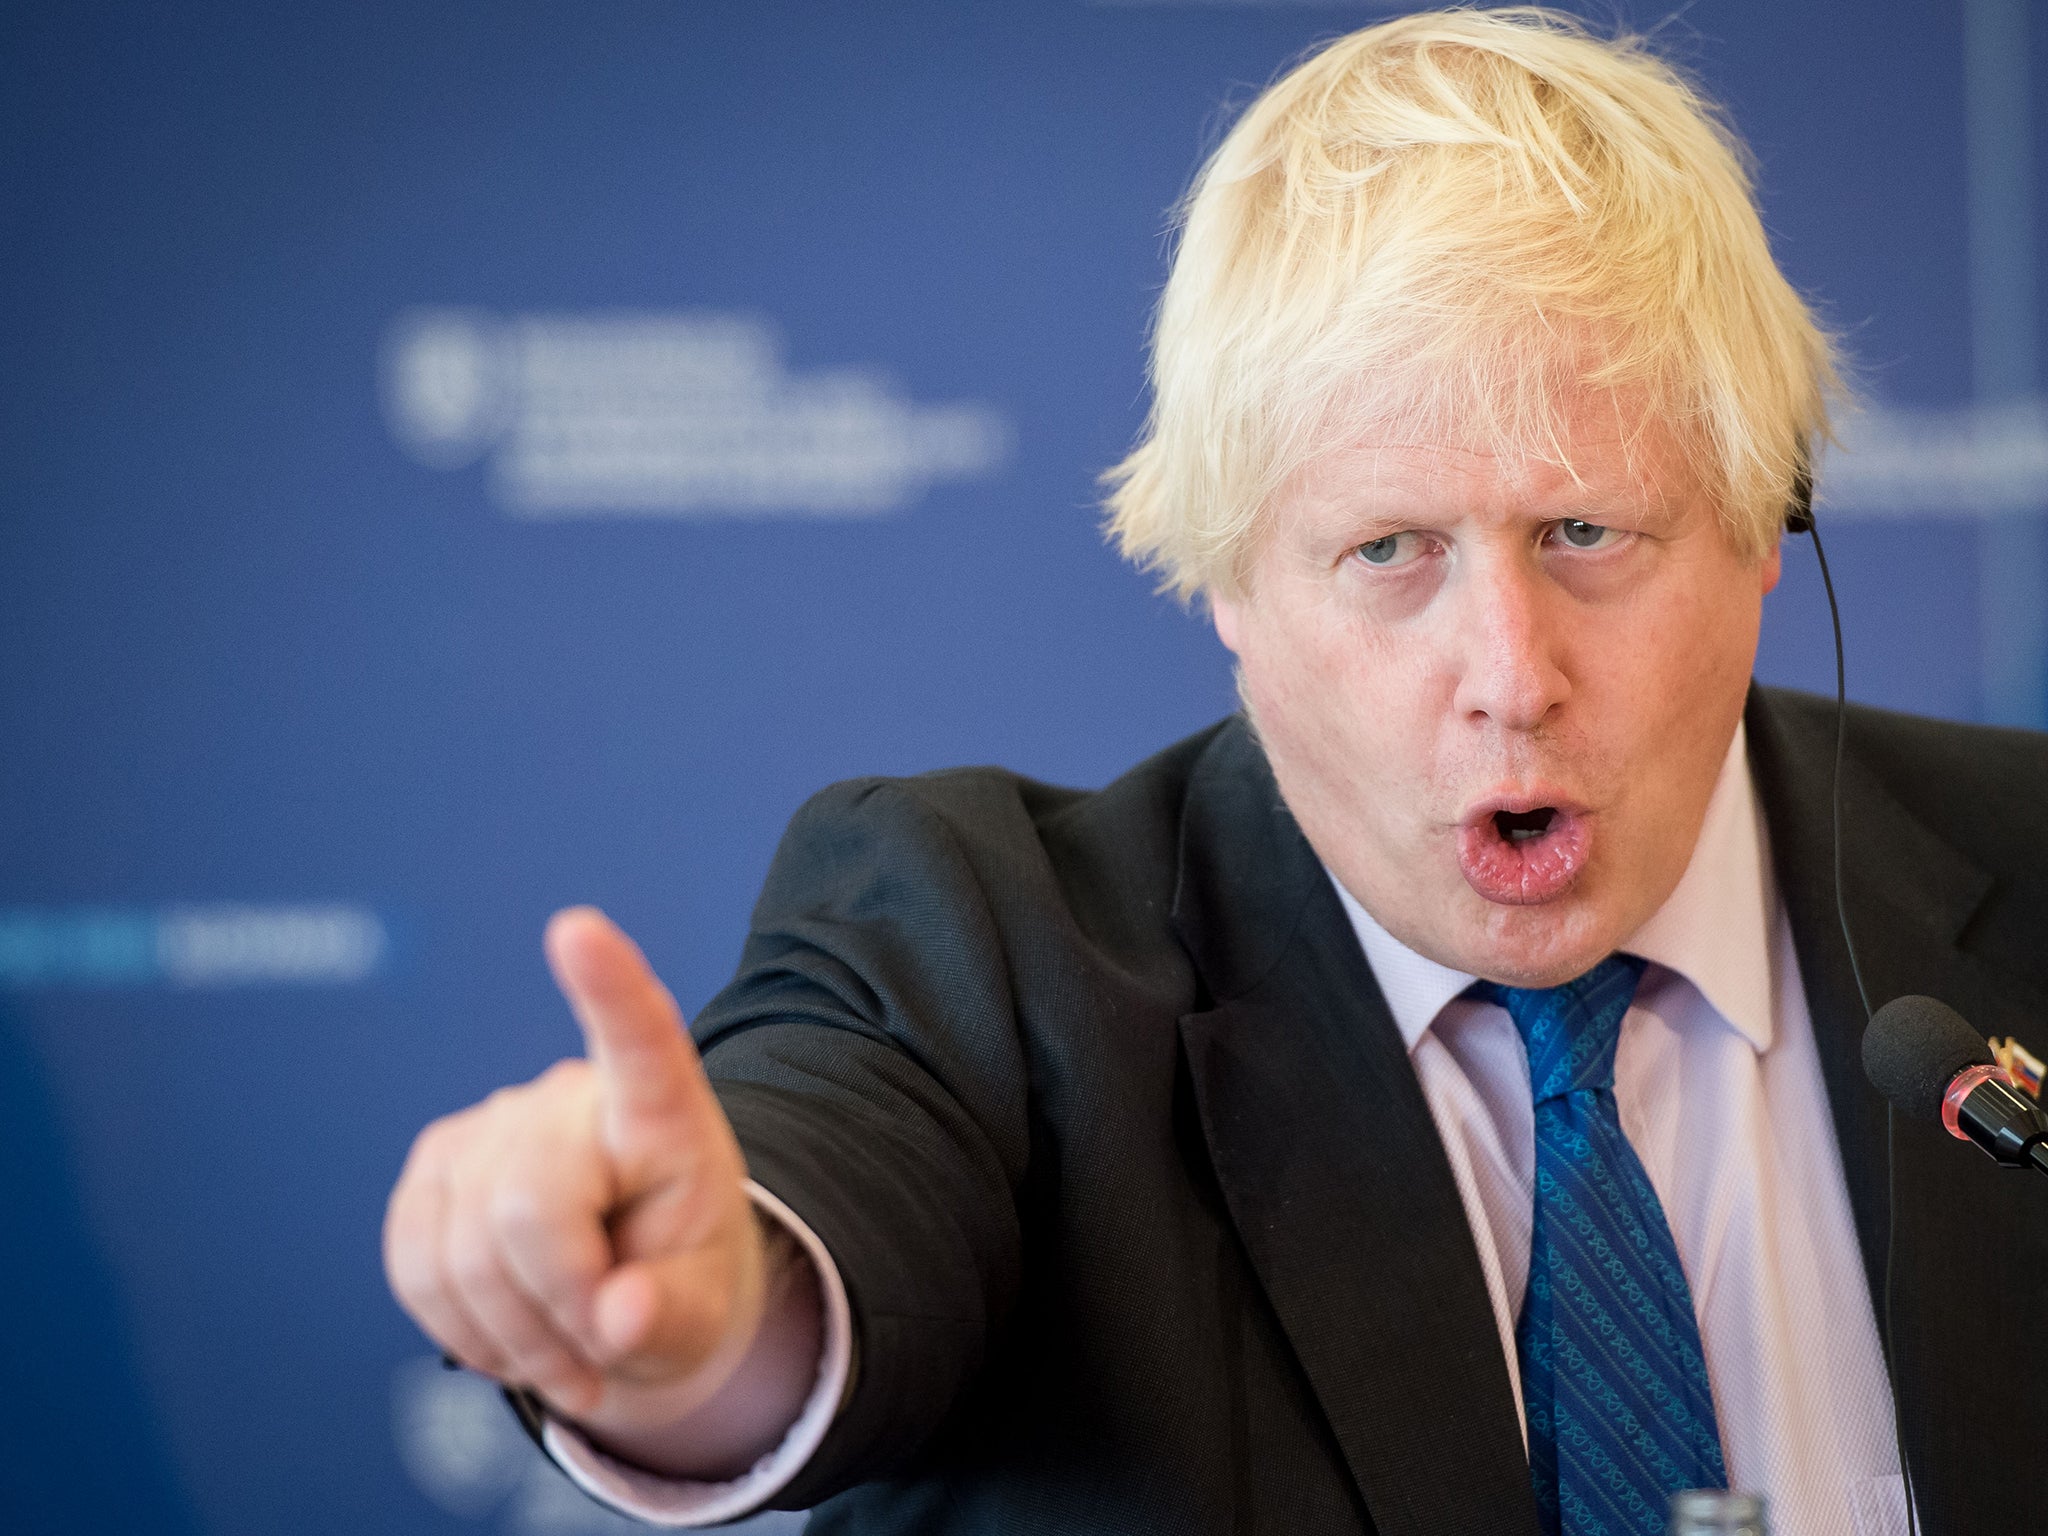 Boris Johnson was called 'unbelievably crass' for the remarks